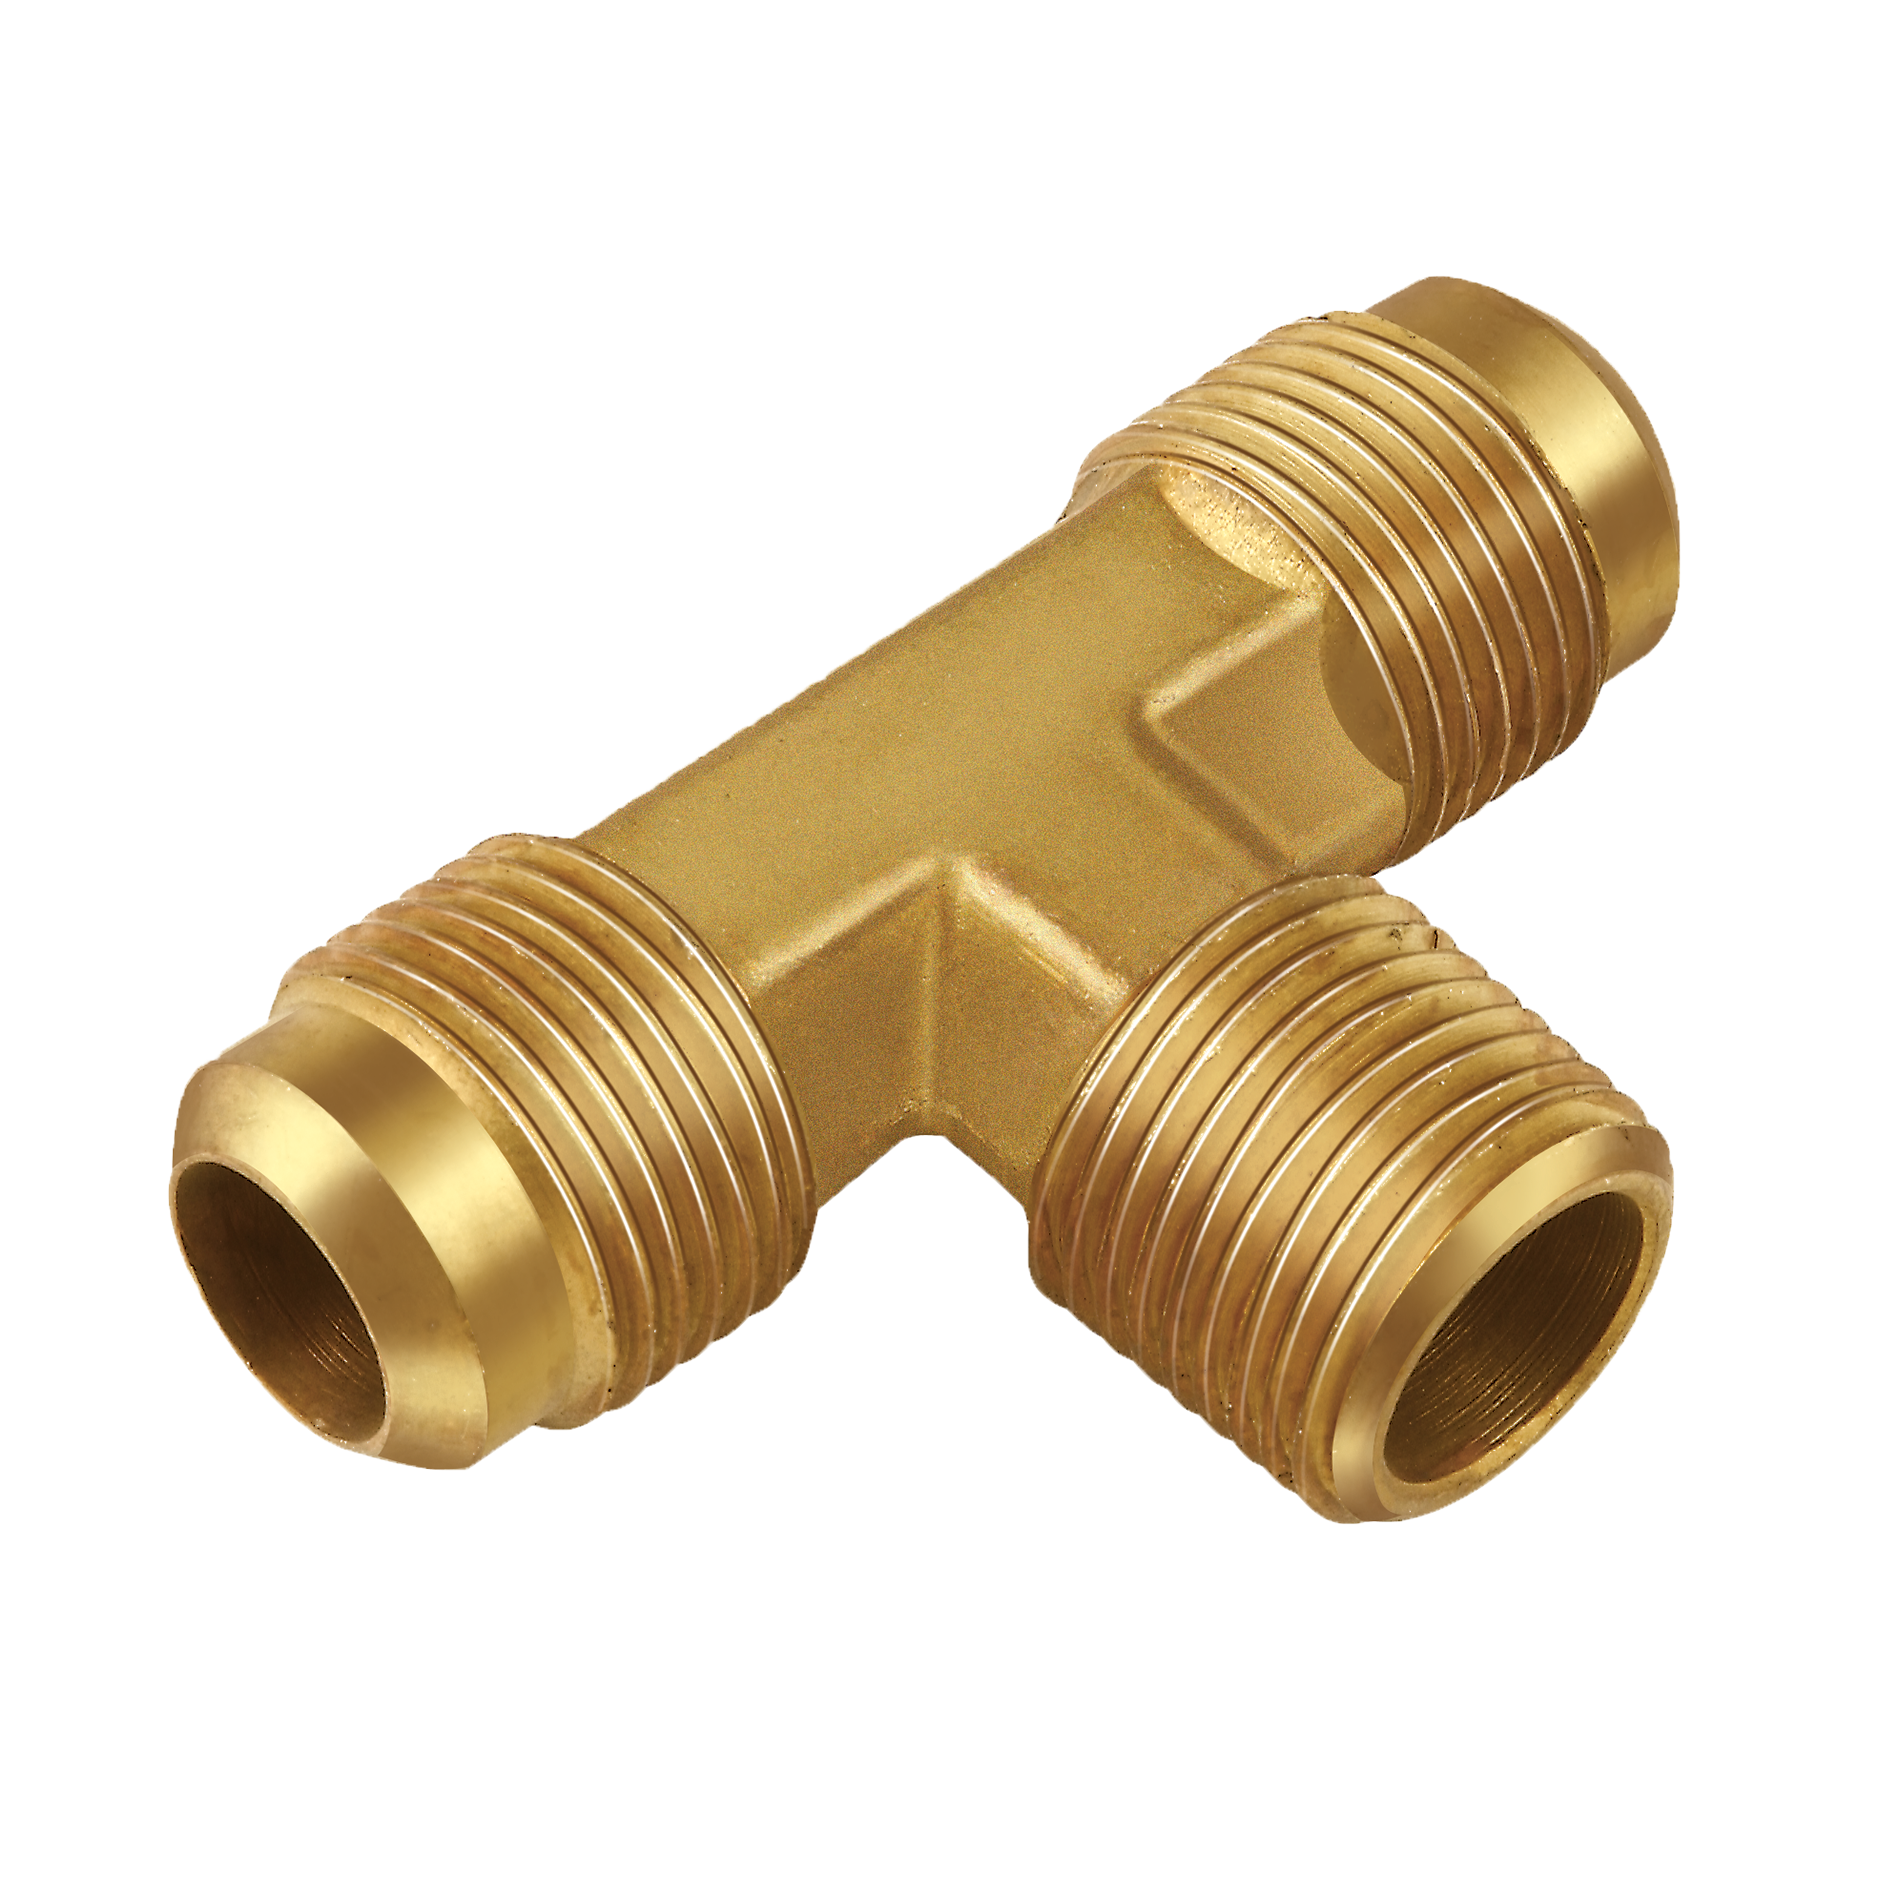 T1-4C Tee 1/4" Flare x 1/4" Flare x 3/8" Male Pipe Thread